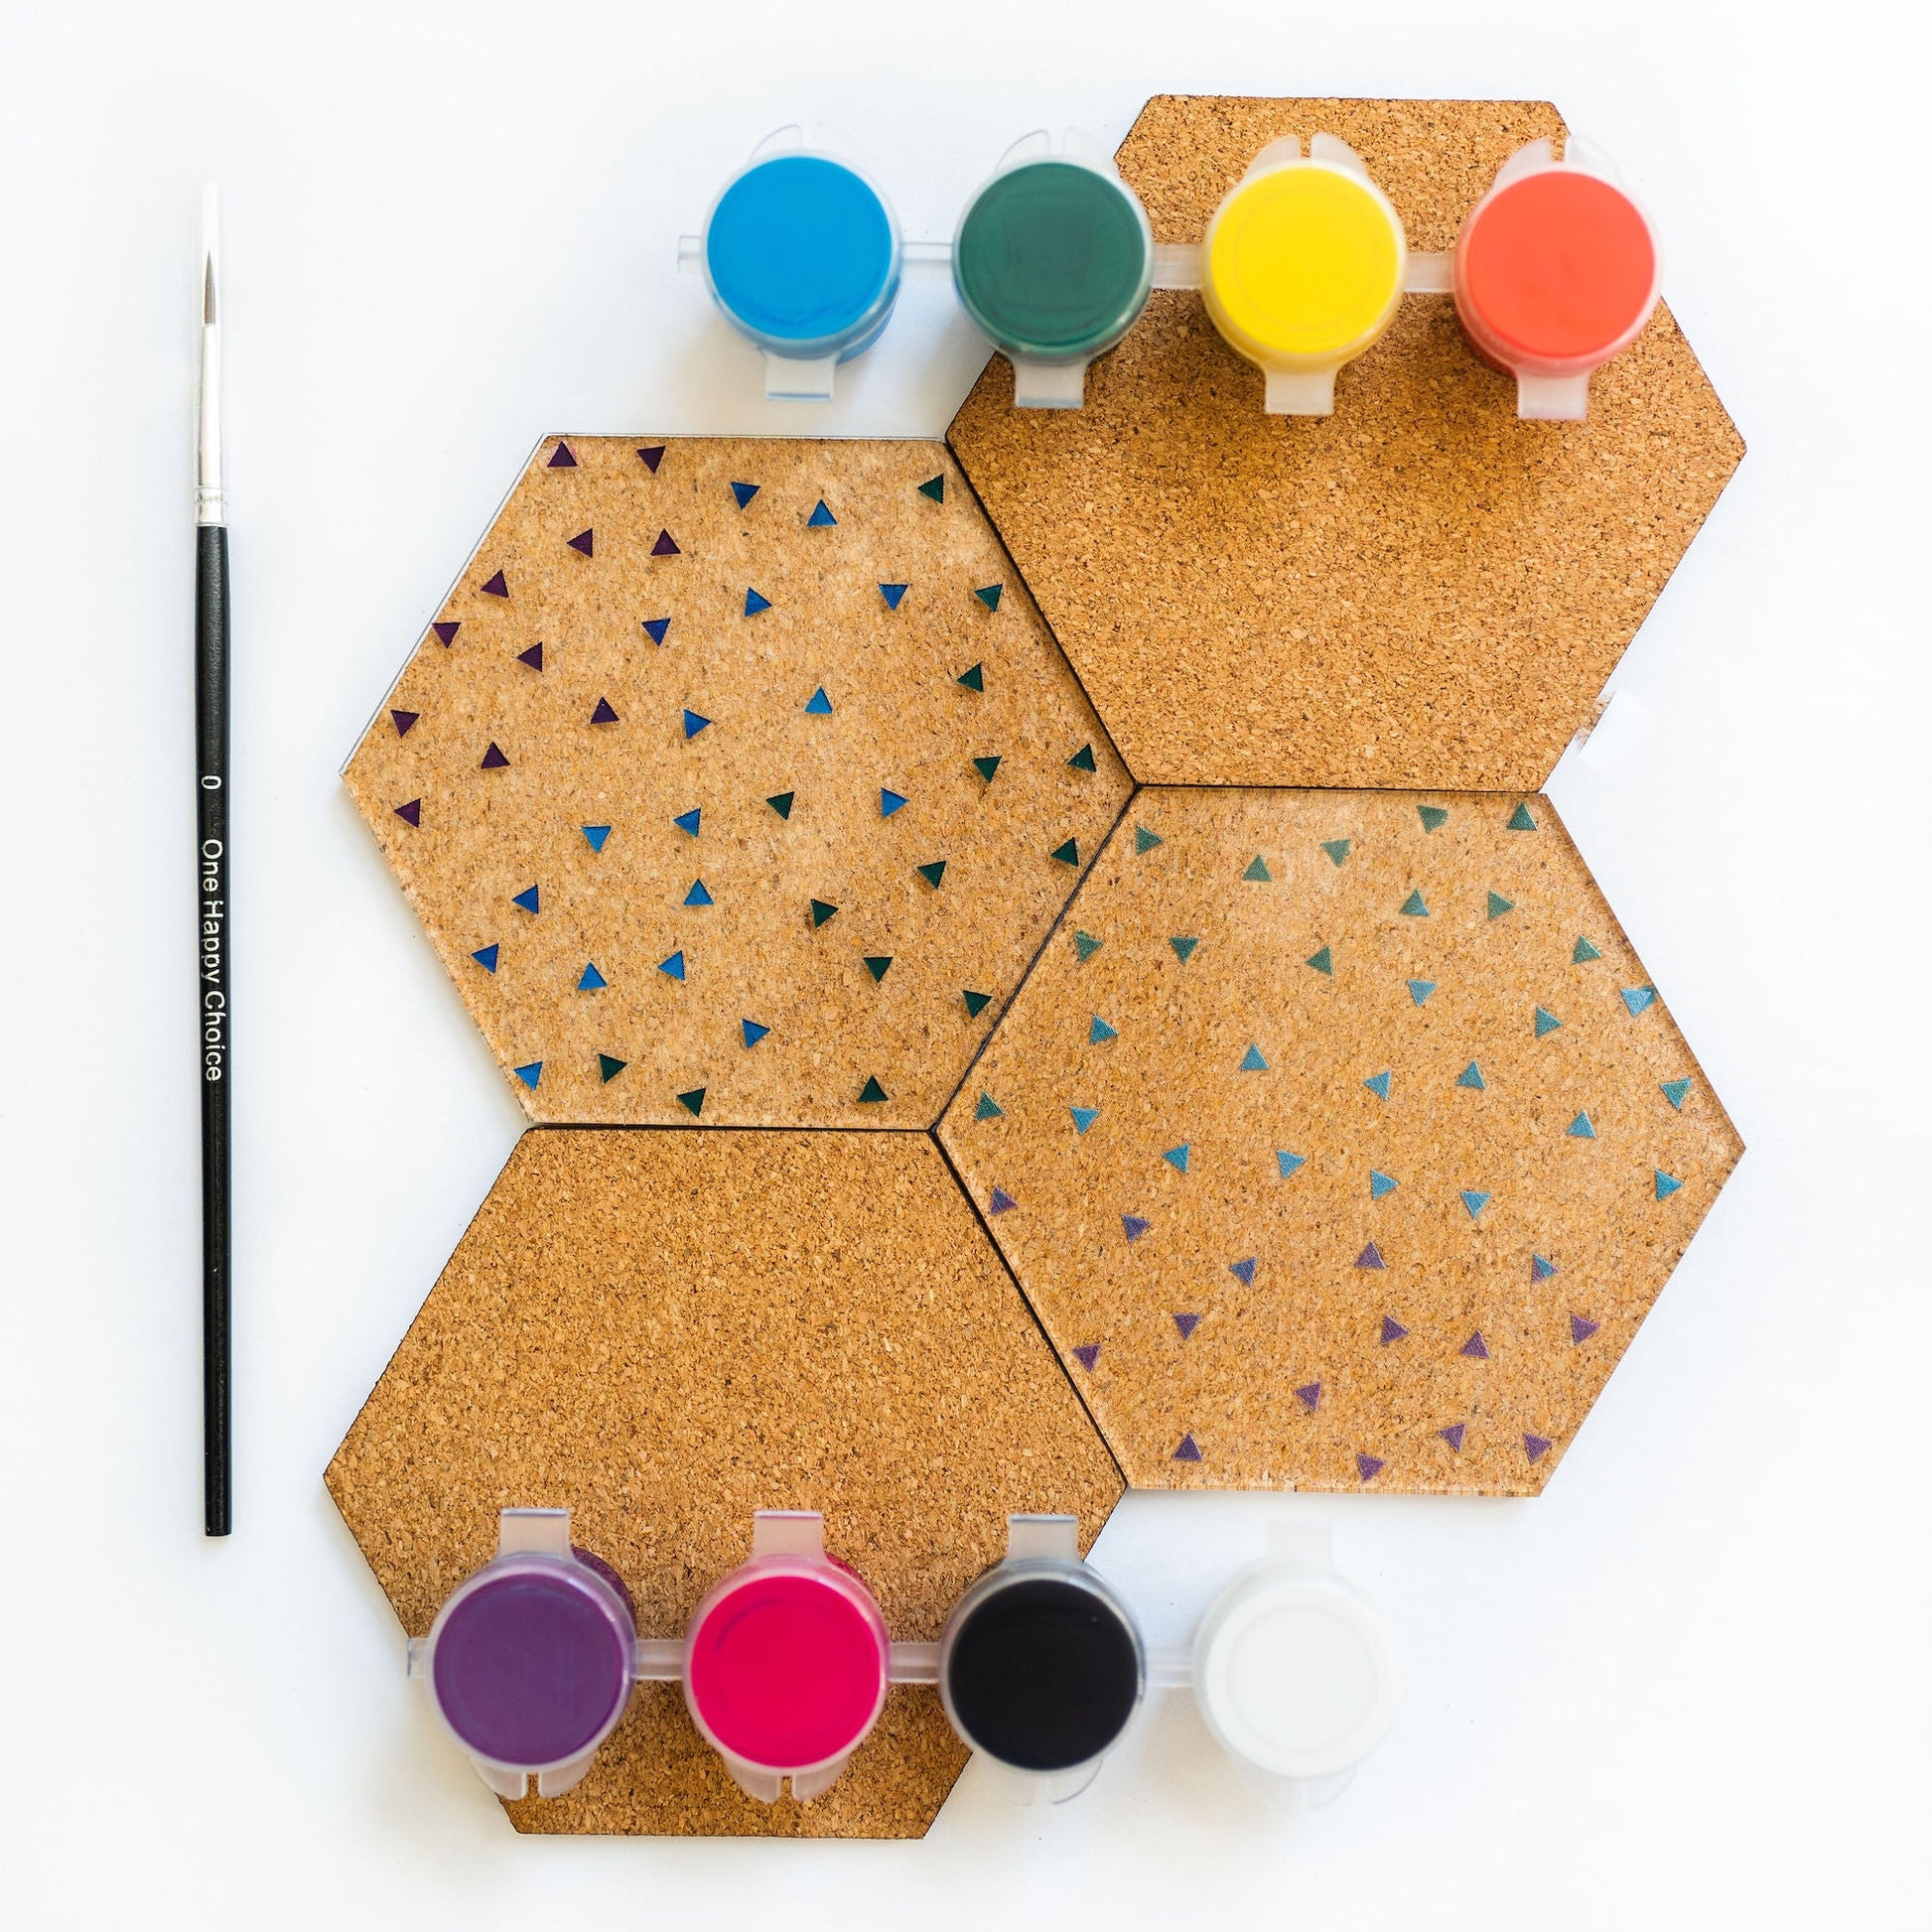 Adding cork backing to painted tiles to make coasters 